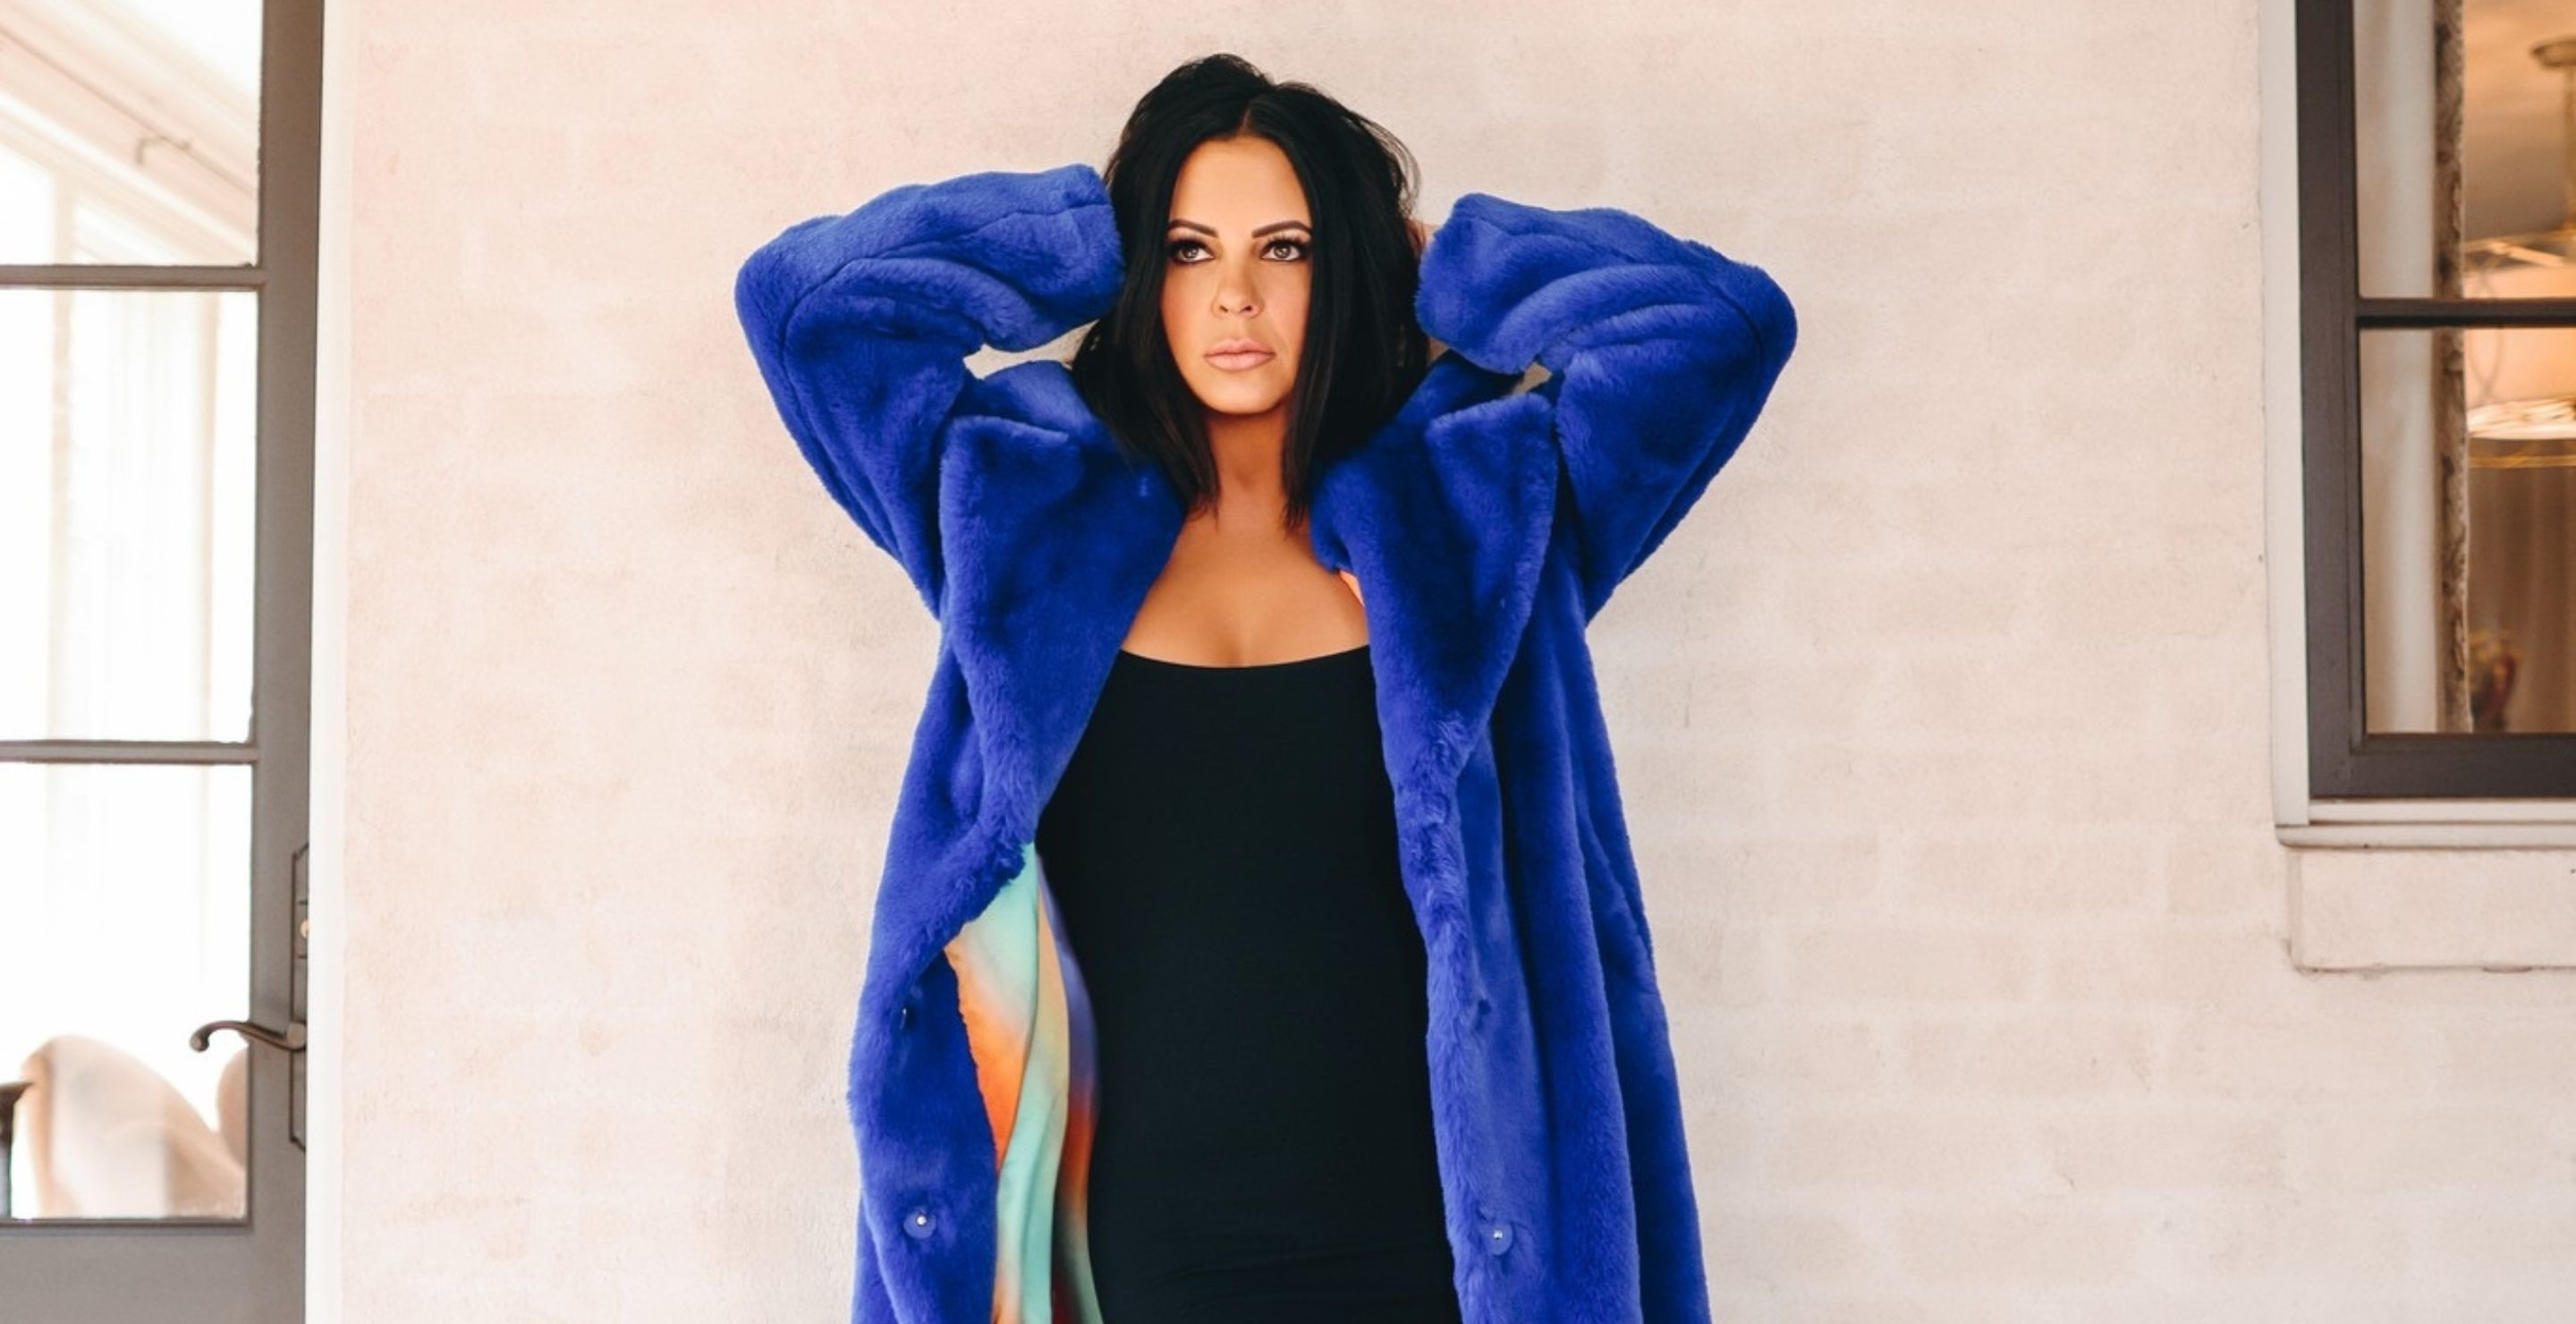 Sara Evans Drops New Song Hours After Canceling ACM Awards Appearance